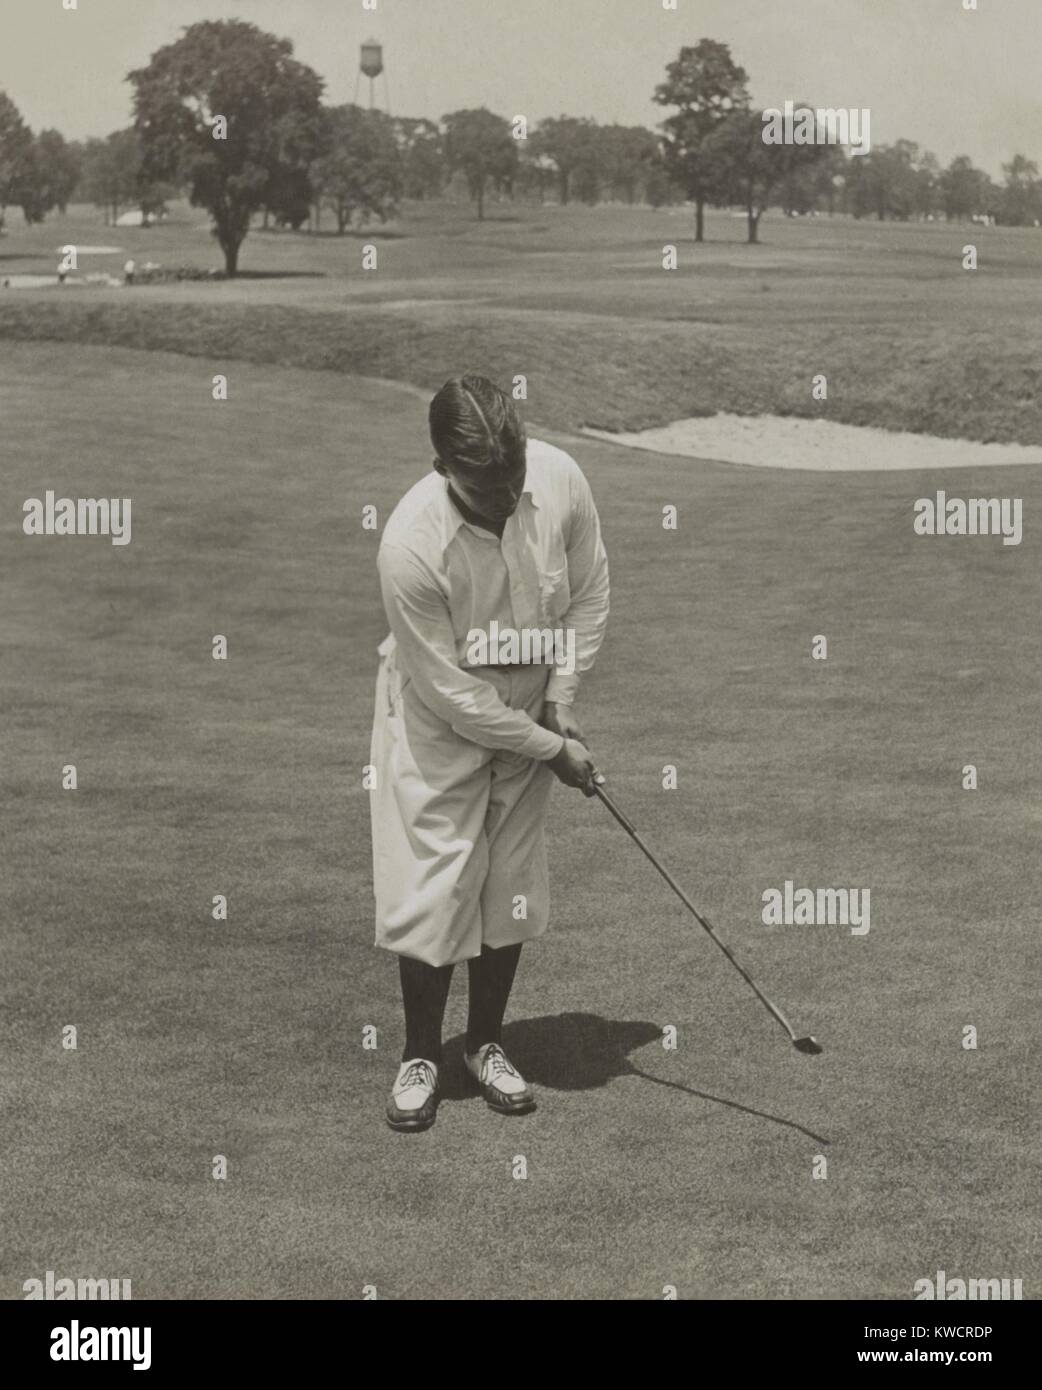 Bobby Jones, winner of 1929 National Open Golf Championship. He is sinking a putt with his famous putter, 'Calamity Jane'. - (BSLOC 2015 1 121) Stock Photo